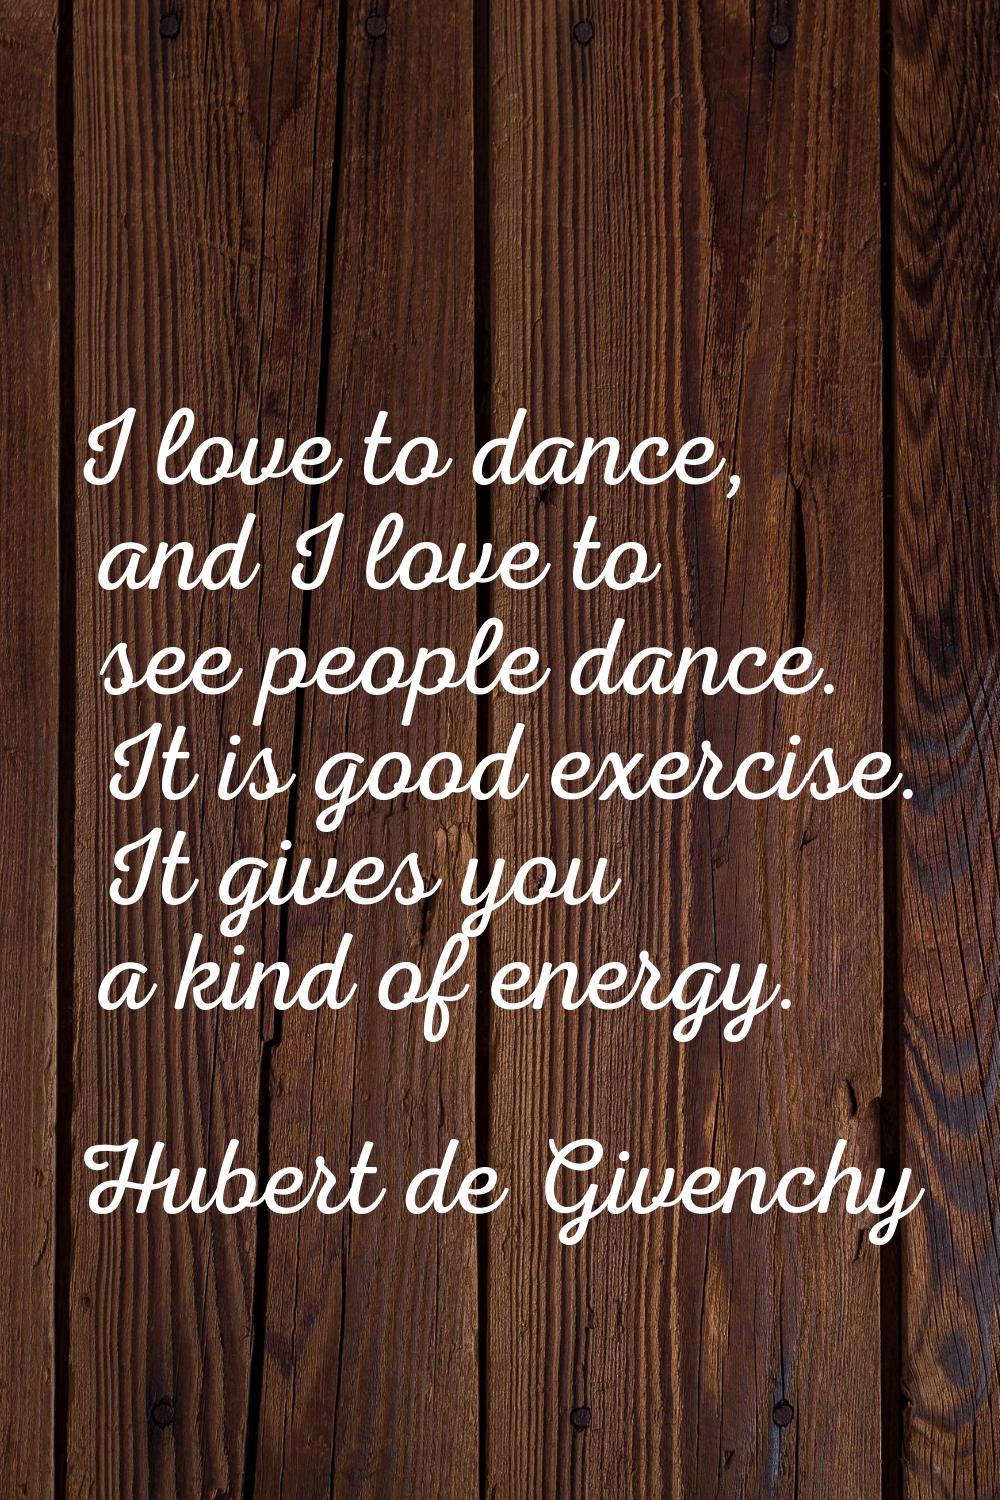 I love to dance, and I love to see people dance. It is good exercise. It gives you a kind of energy